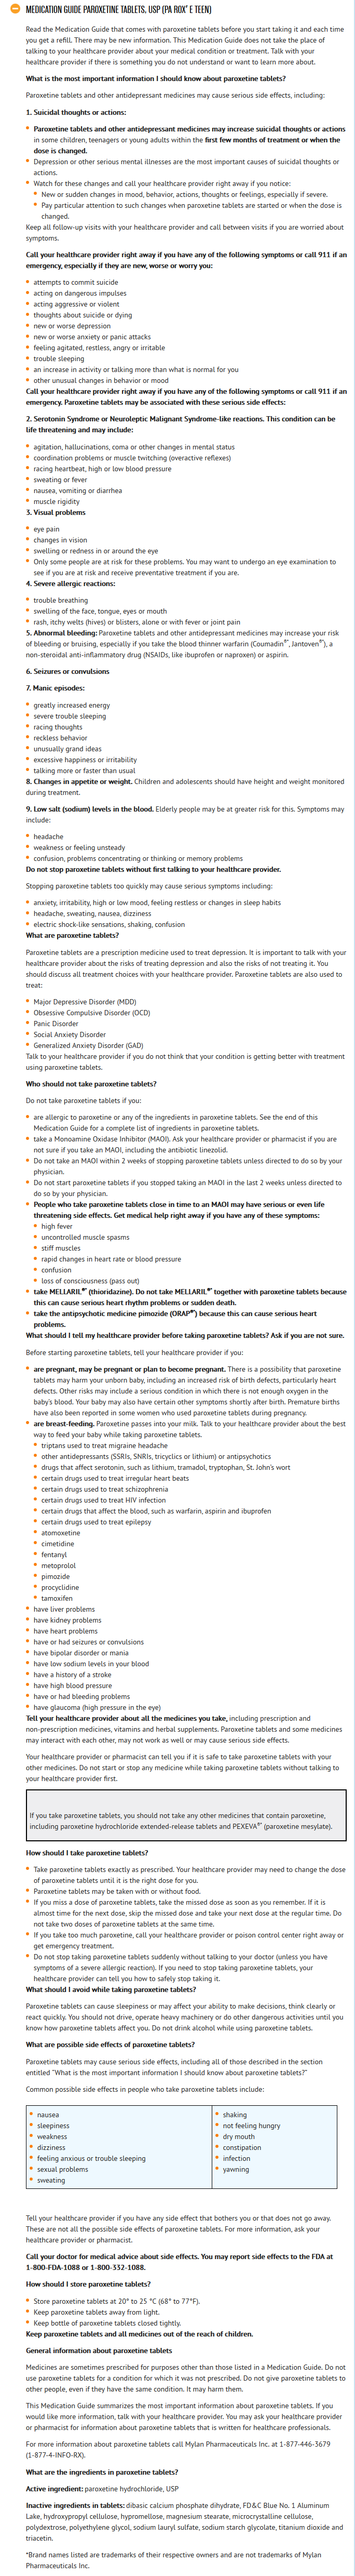 Paroxetine medication guide.png